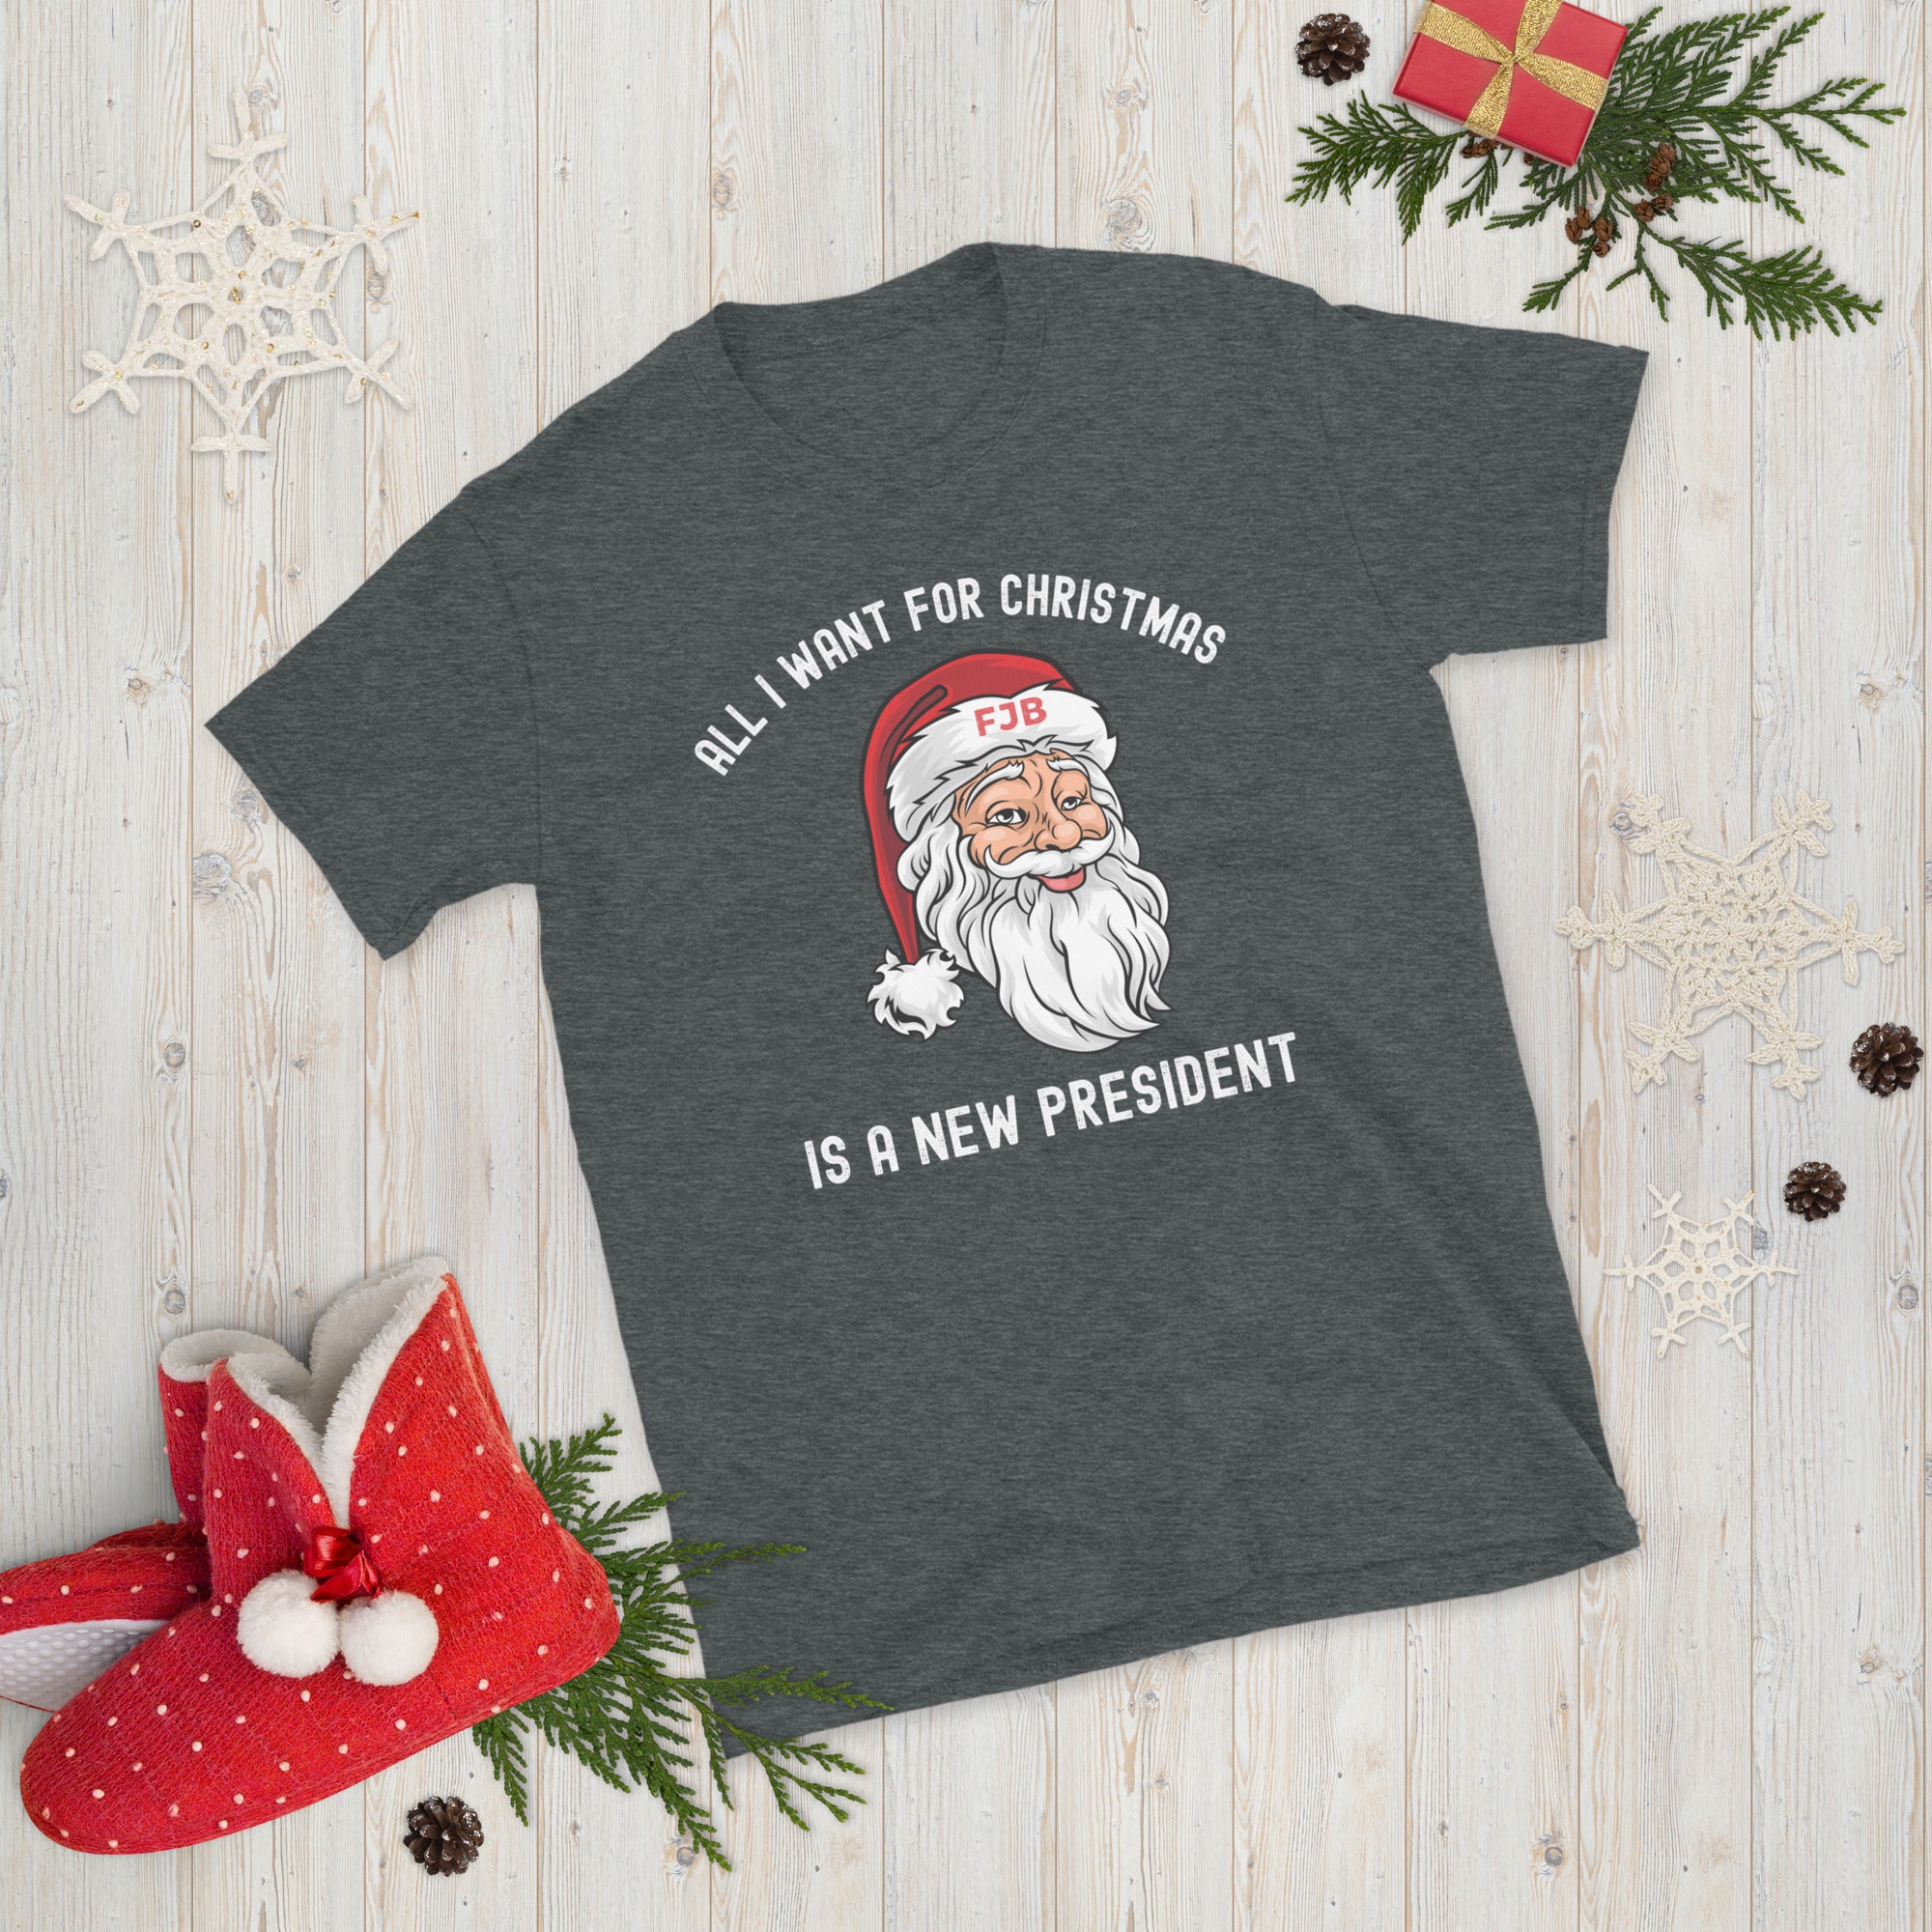 All I Want For Christmas Is A New President, Republican Christmas Shirt, Xmas Conservative ΤShirt, Impeach Biden Tee, FJB Shirt, FJB Gifts - Madeinsea©